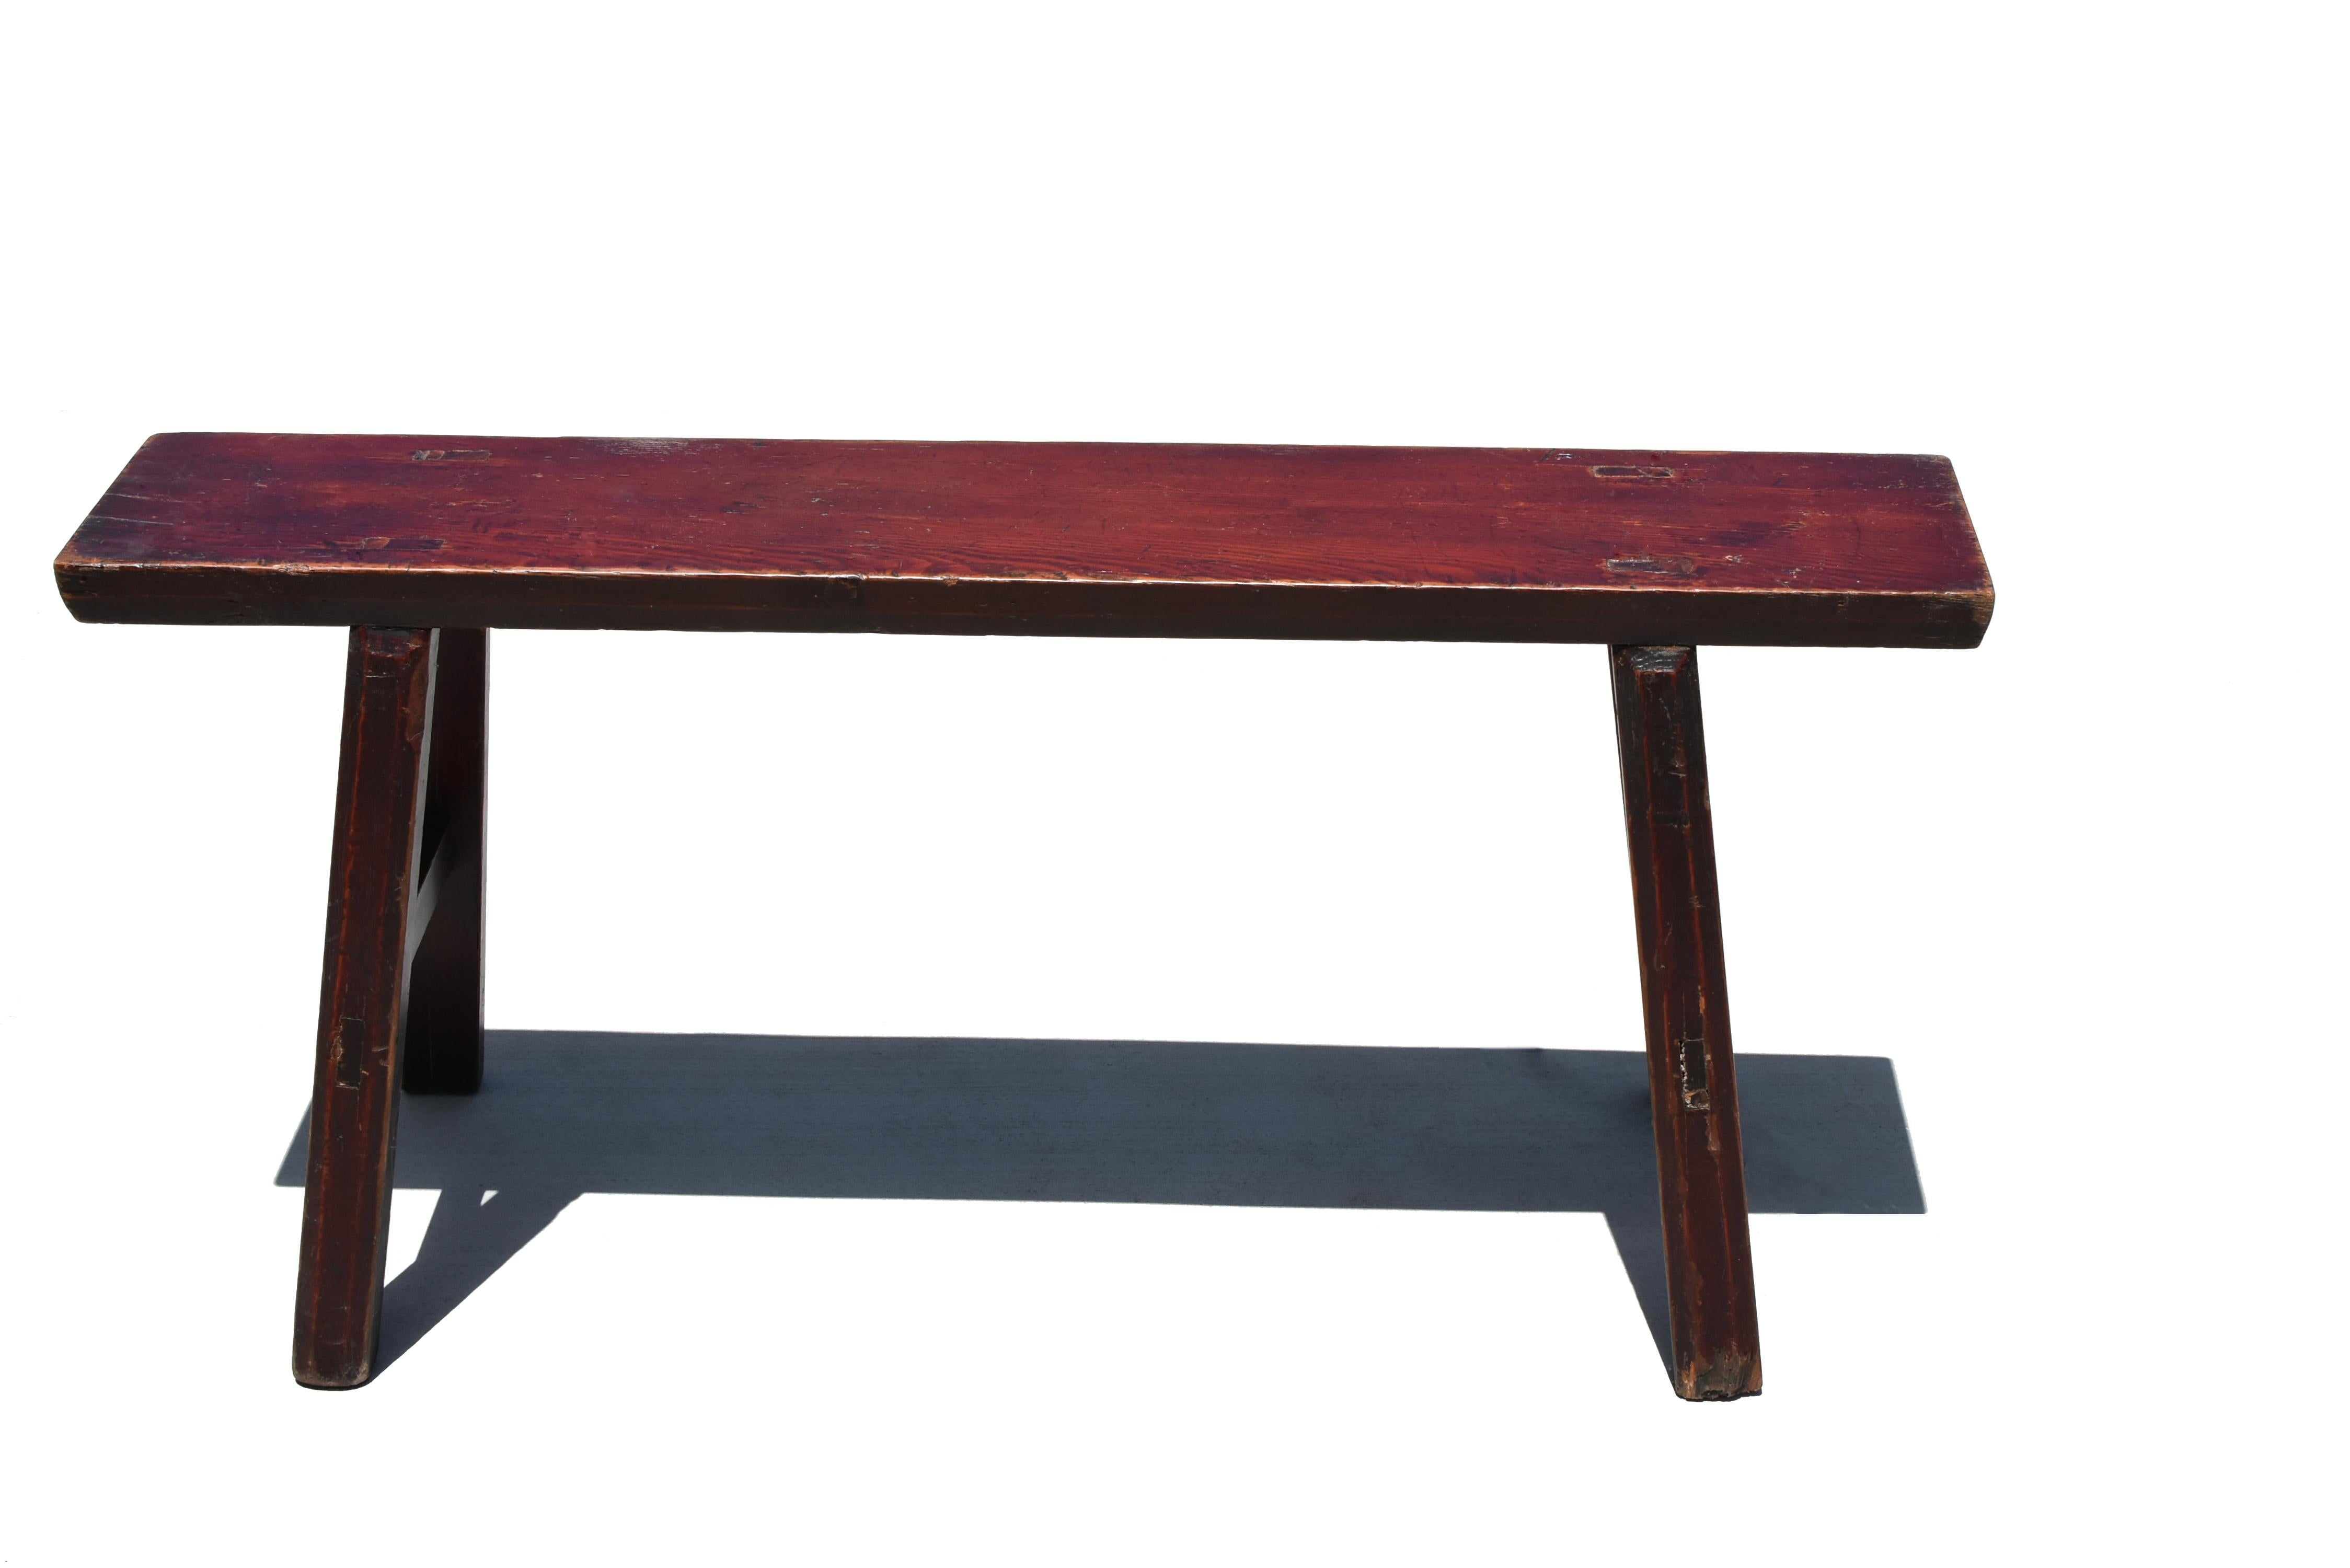 A beautiful solid wood bench with gorgeous wood grain under nice reddish brown finish. The top is made of one single solid board. Solid construction with tenons and mortises ensures stability. A truly functional and versatile piece for all styles of